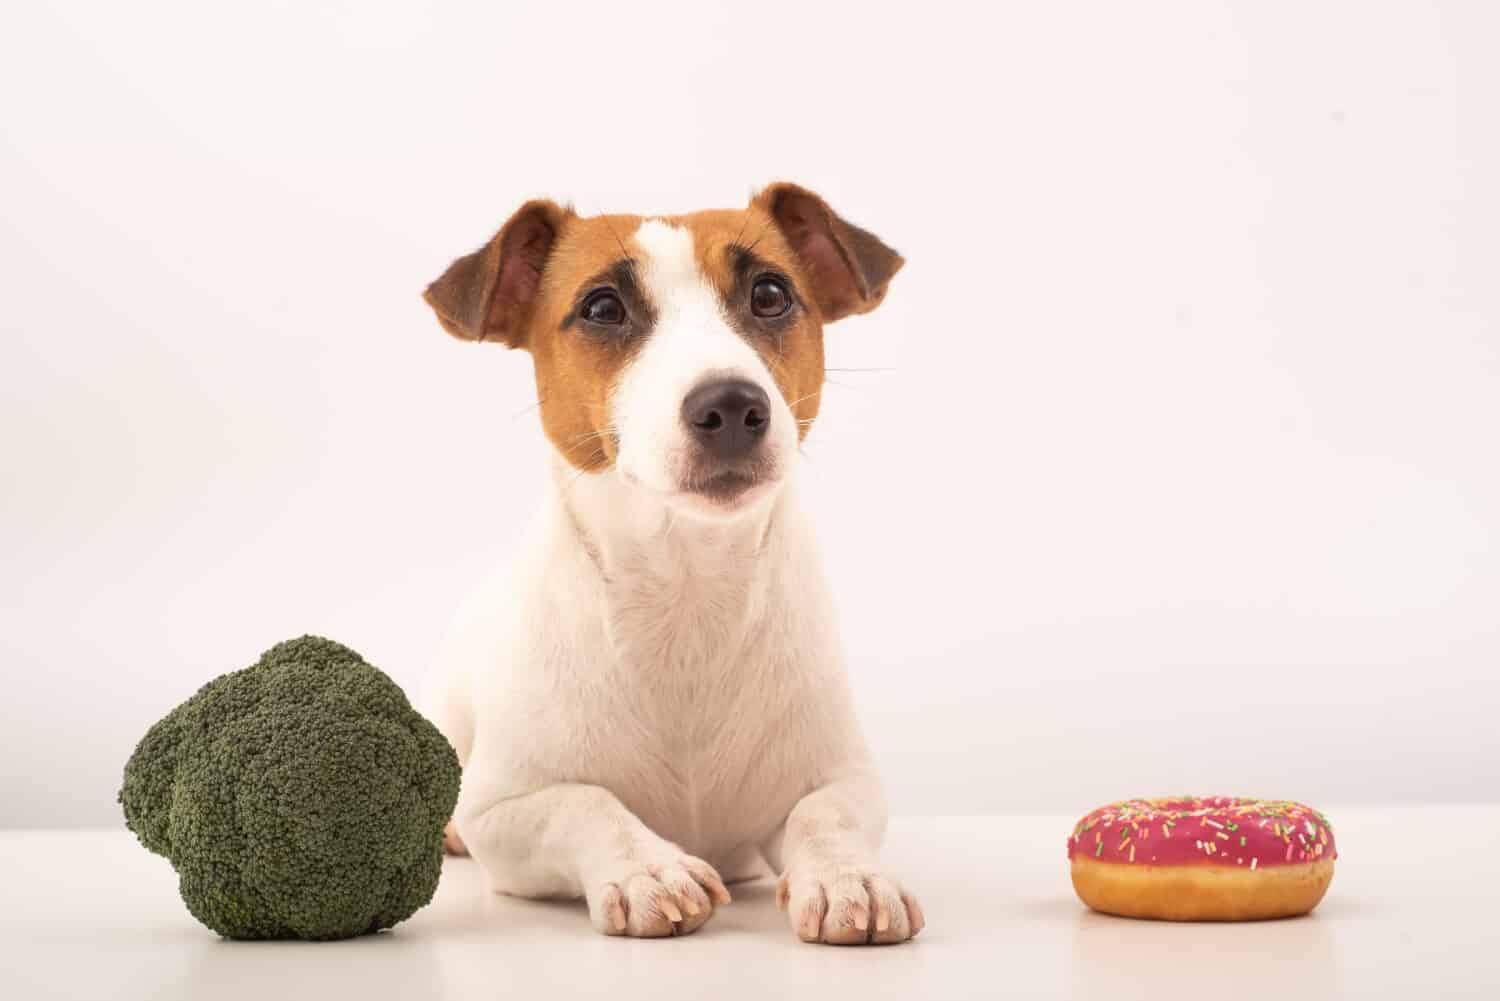 Dog jack russell terrier food choice. Food habits